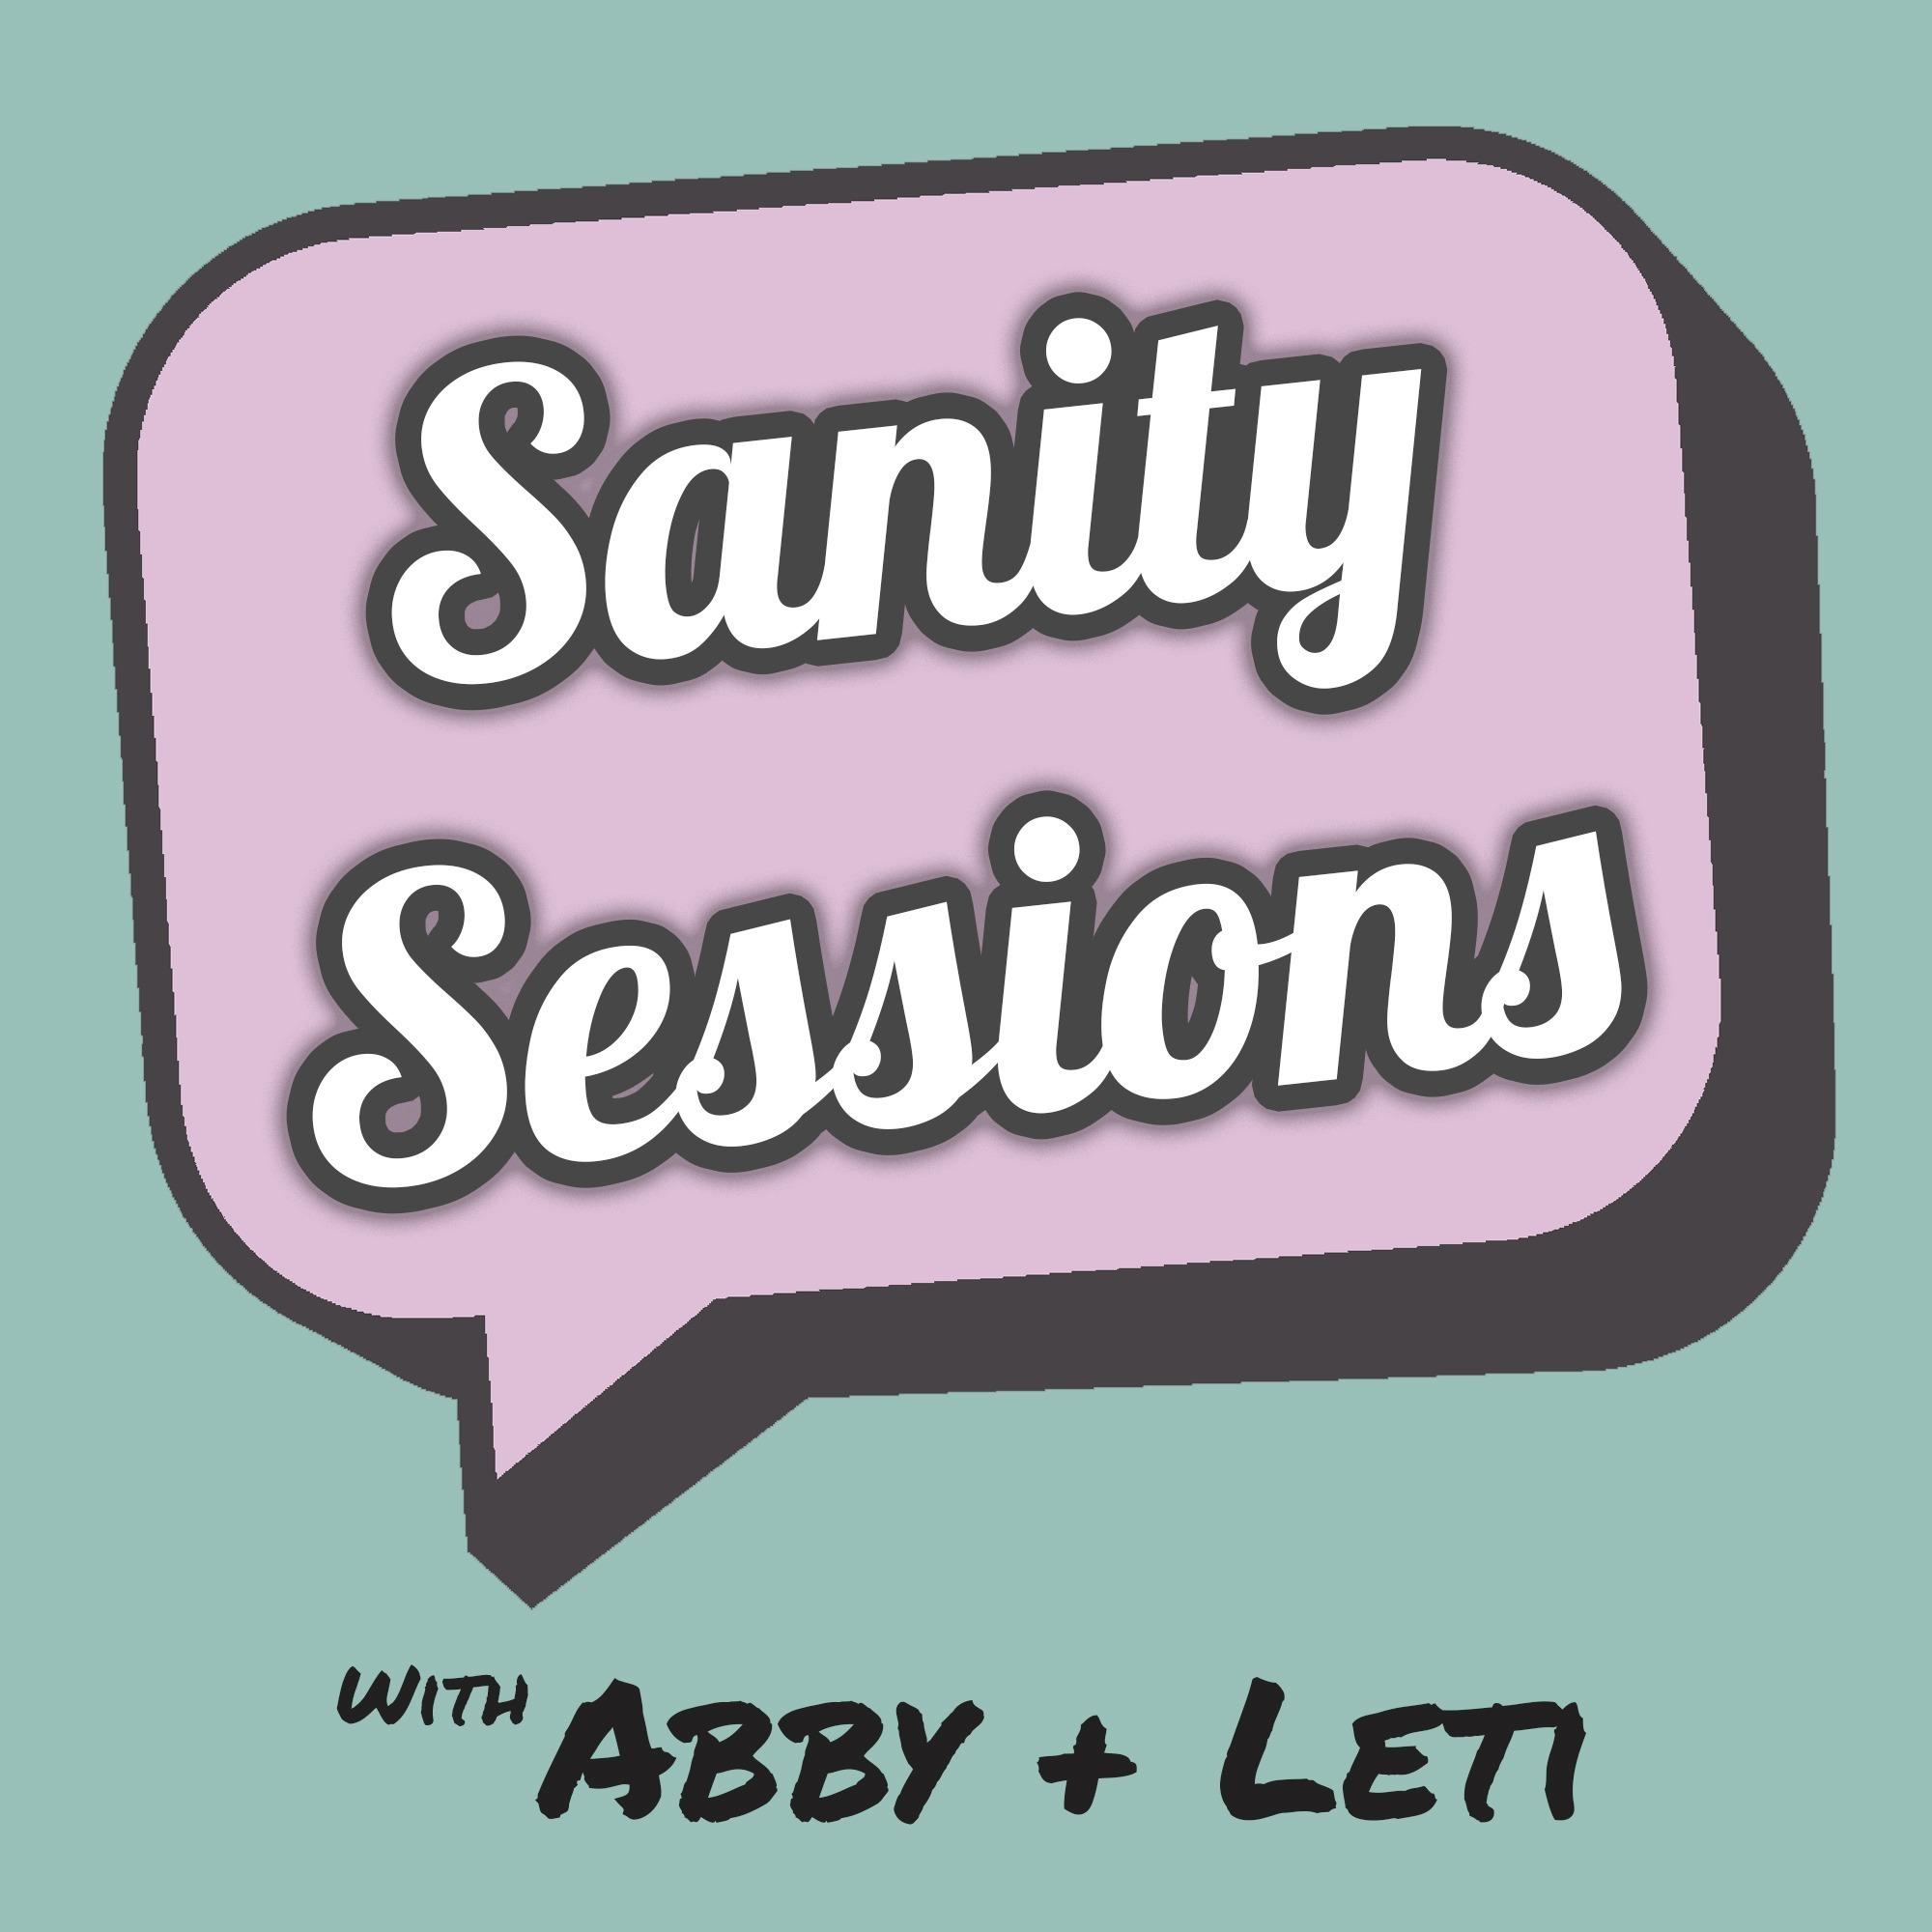 Sanity Sessions